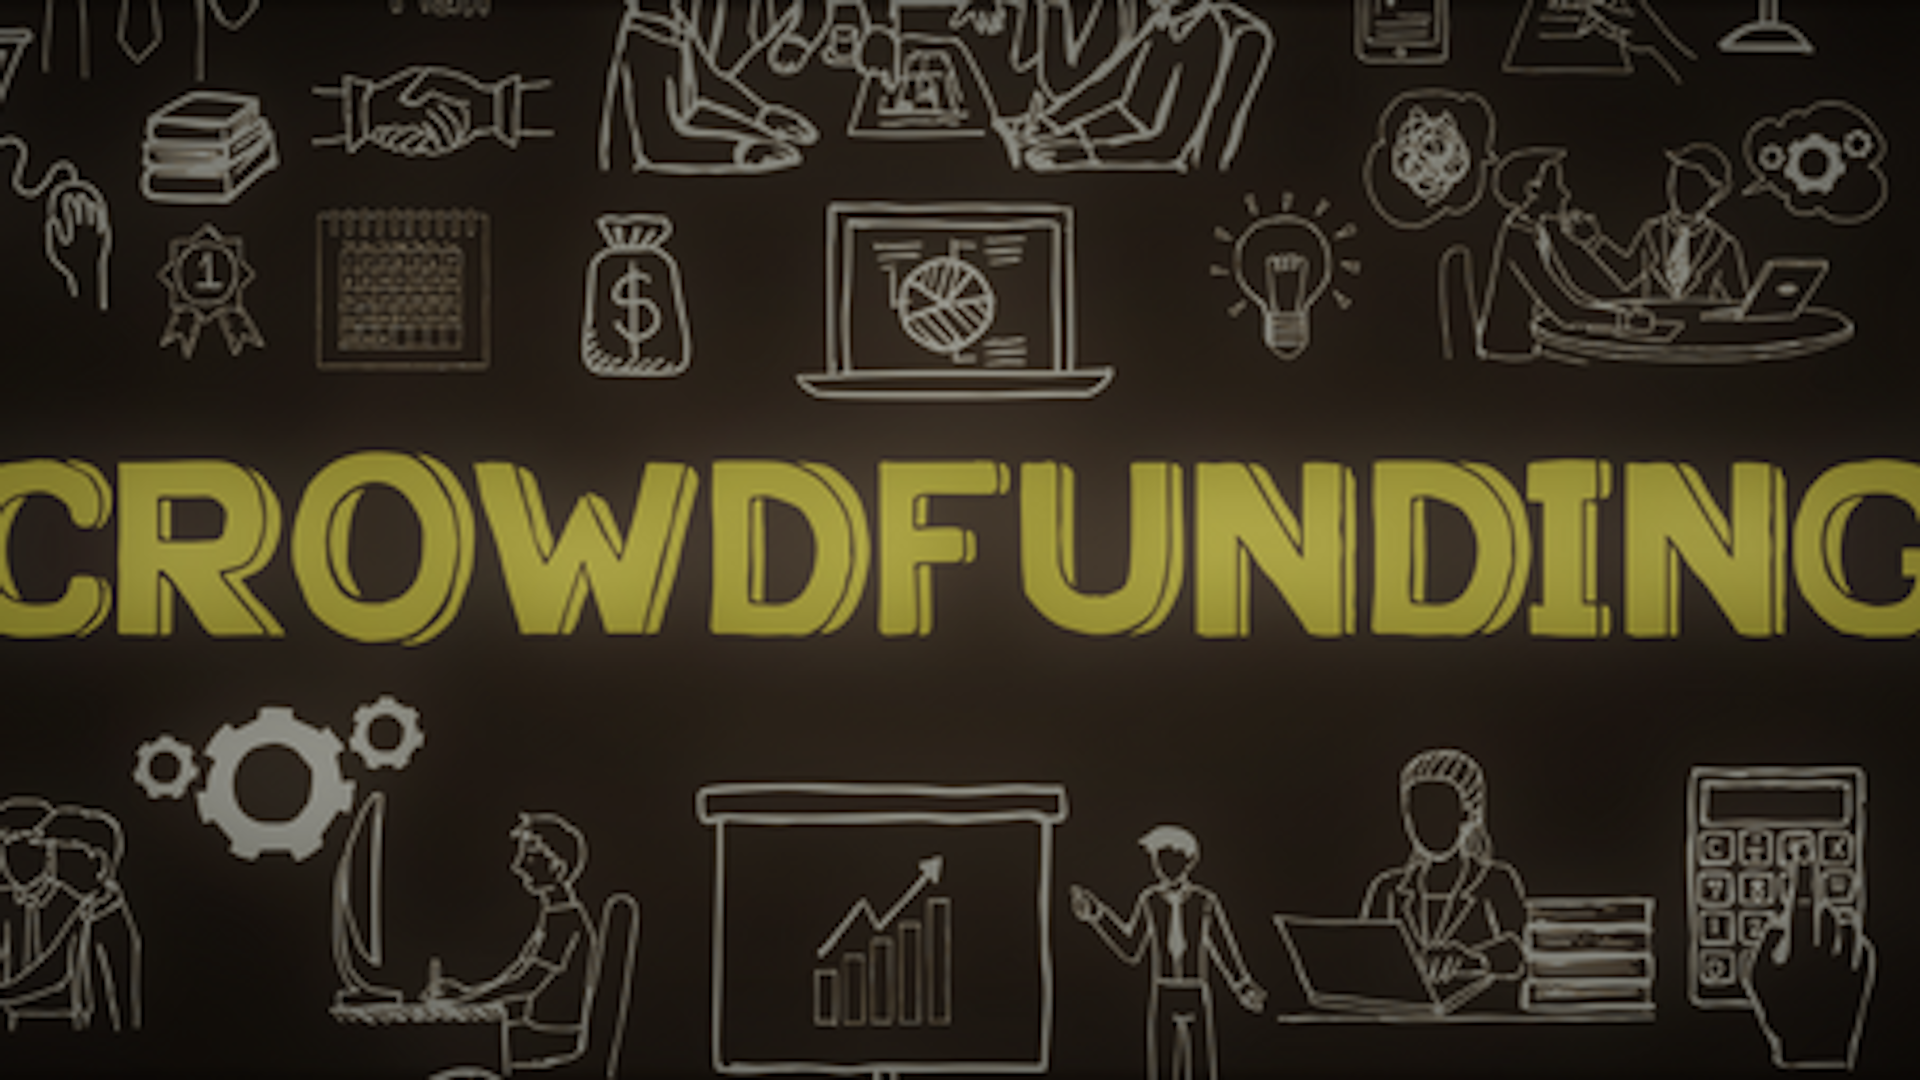 What Is Crowdfunding? And Other FAQs